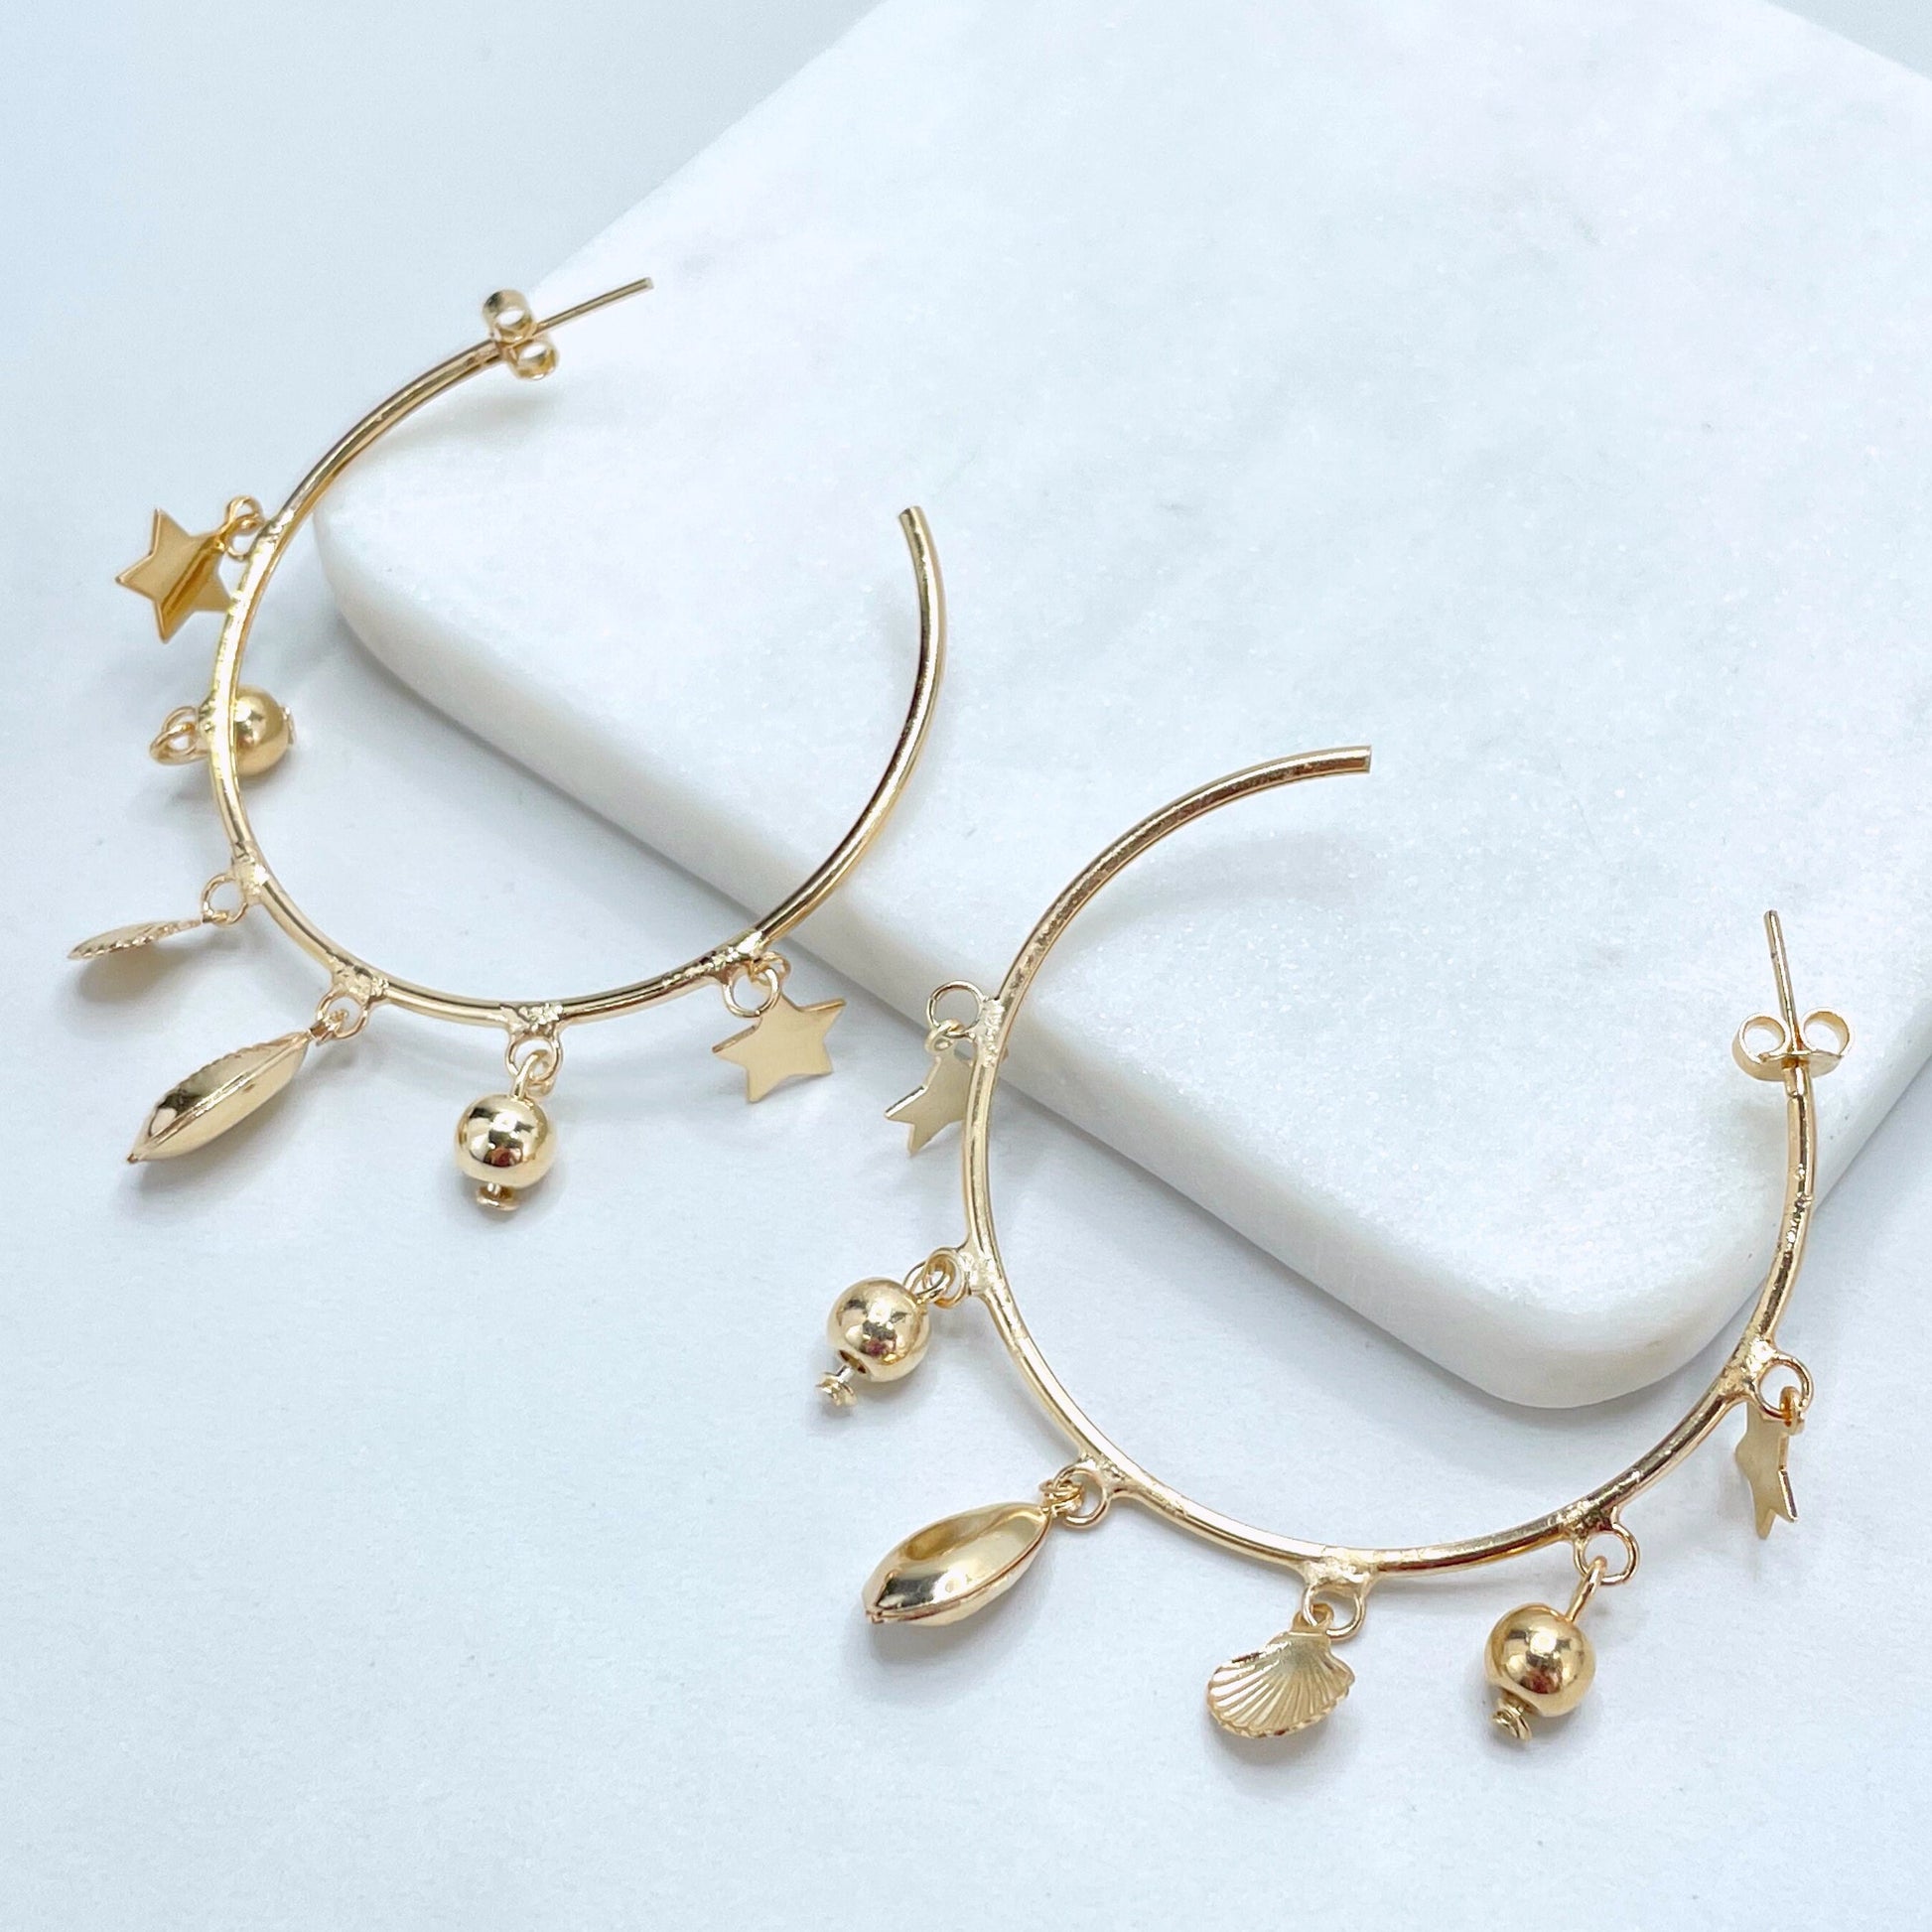 18k Gold Filled 50mm C-Hoops Sea Marine Theme Earrings with Stars, Cowry Shell, Balls Charms, Wholesale Jewelry Making Supplies